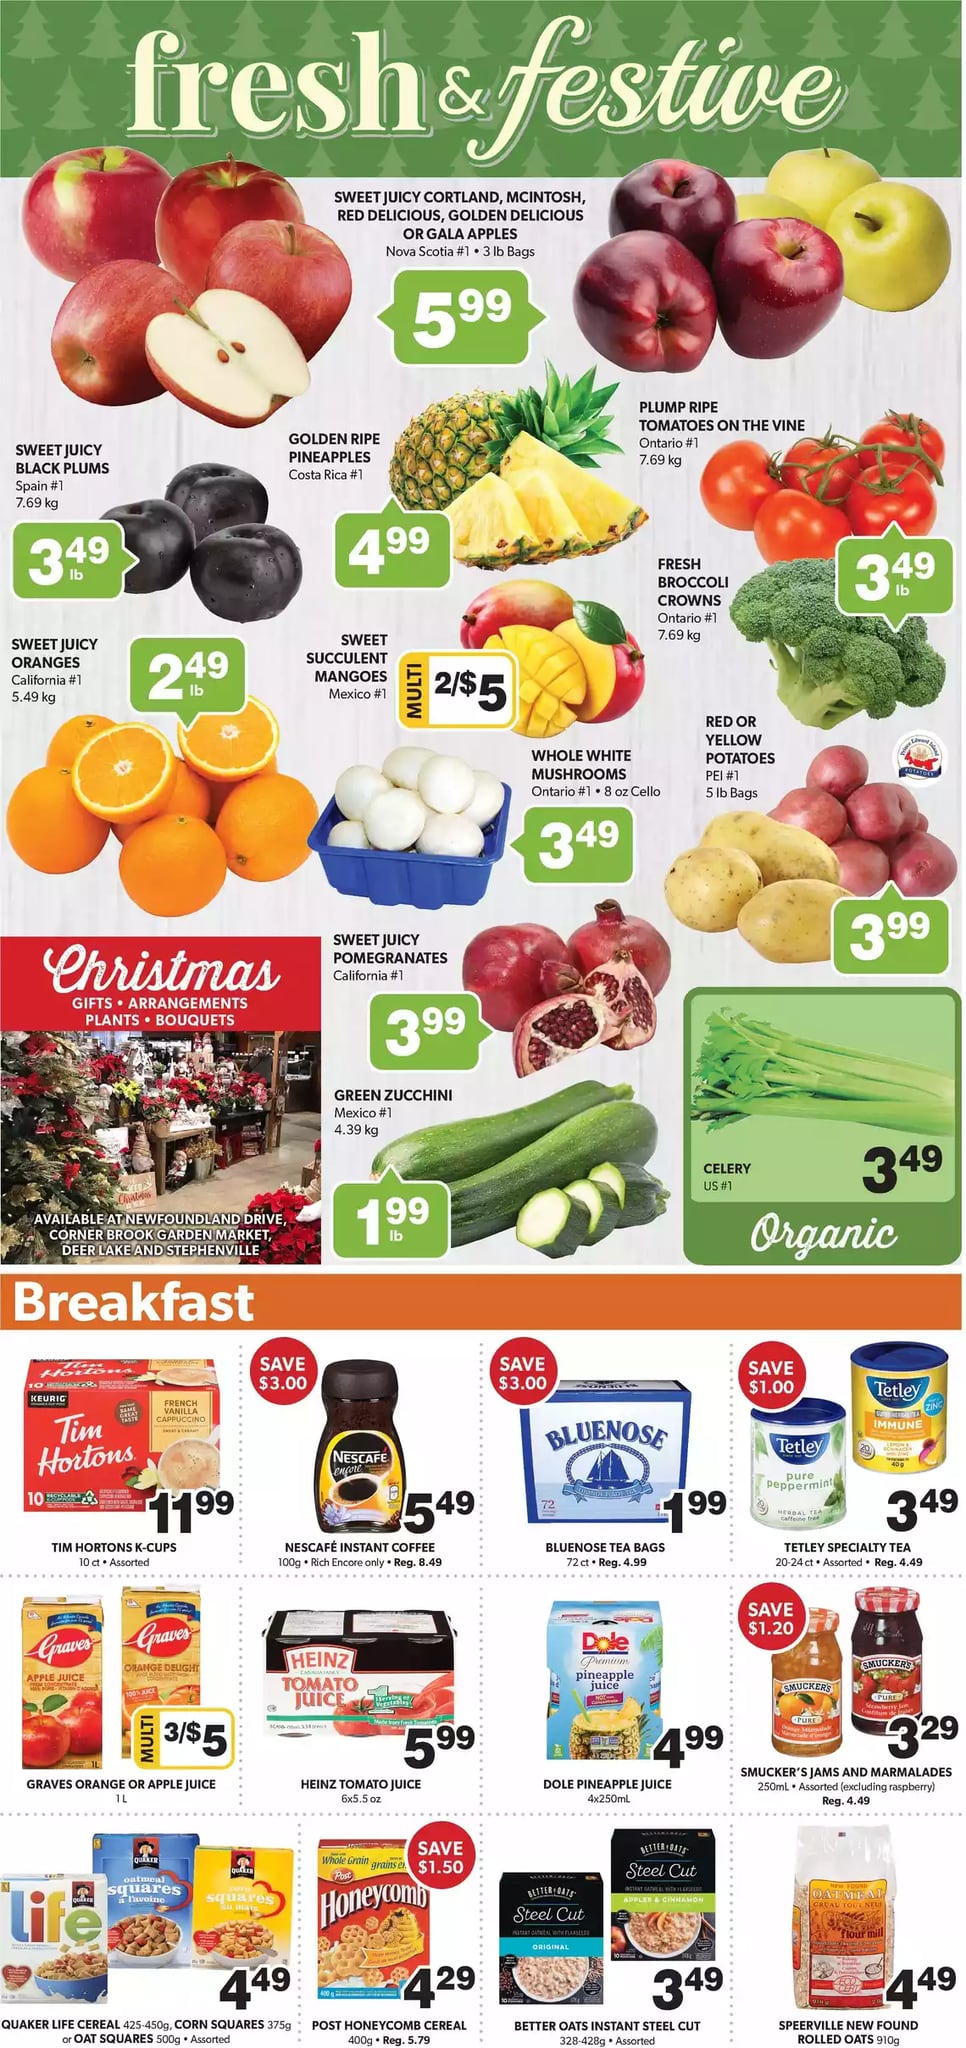 Colemans - Weekly Flyer Specials - Page 2